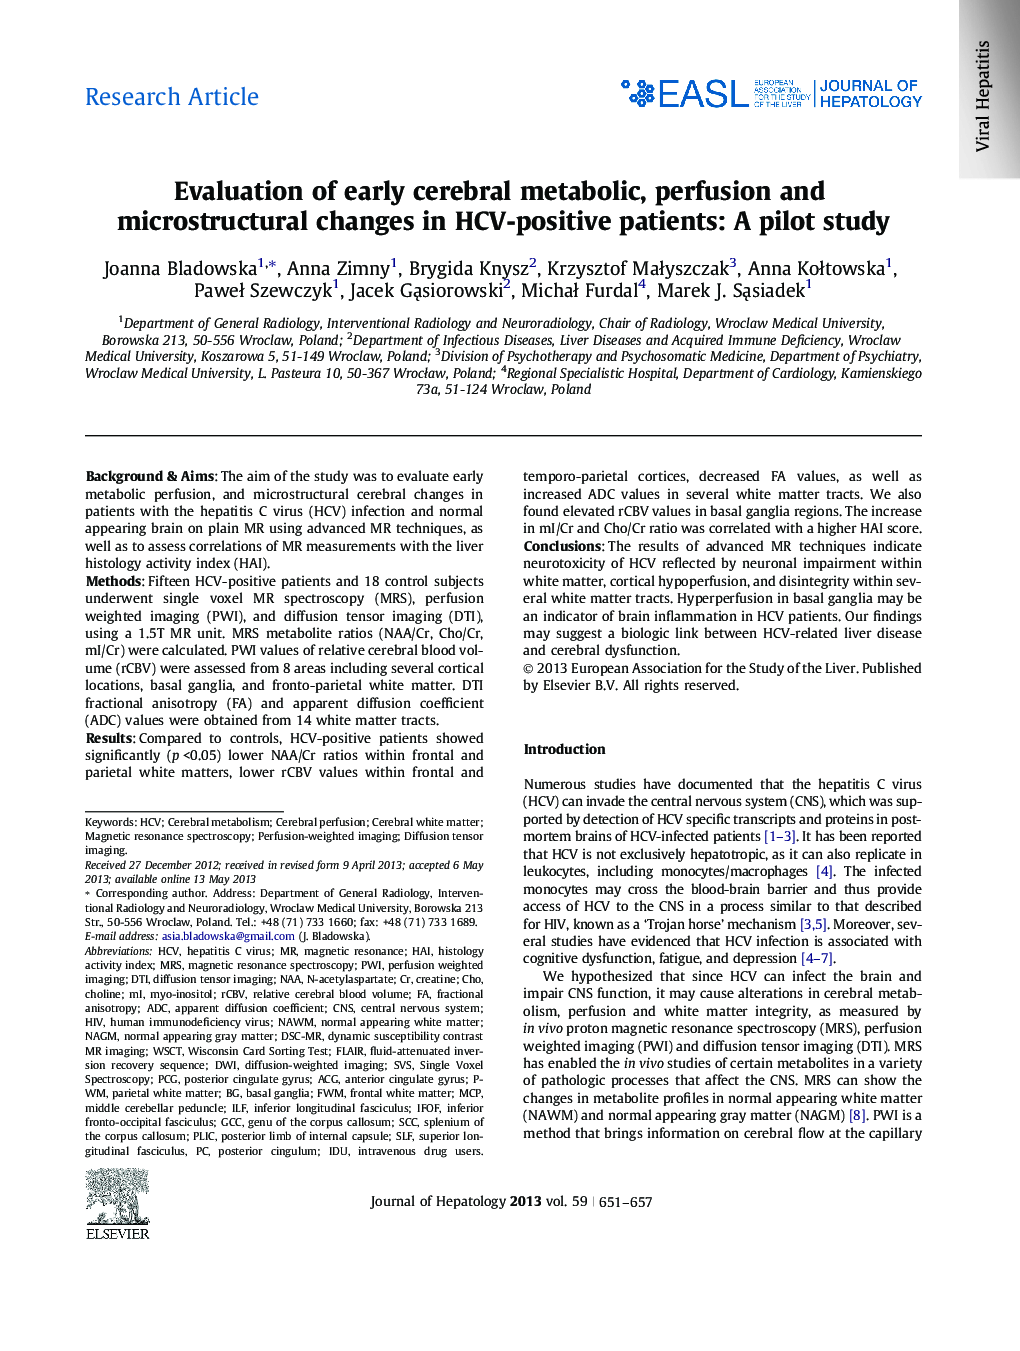 Research ArticleEvaluation of early cerebral metabolic, perfusion and microstructural changes in HCV-positive patients: A pilot study